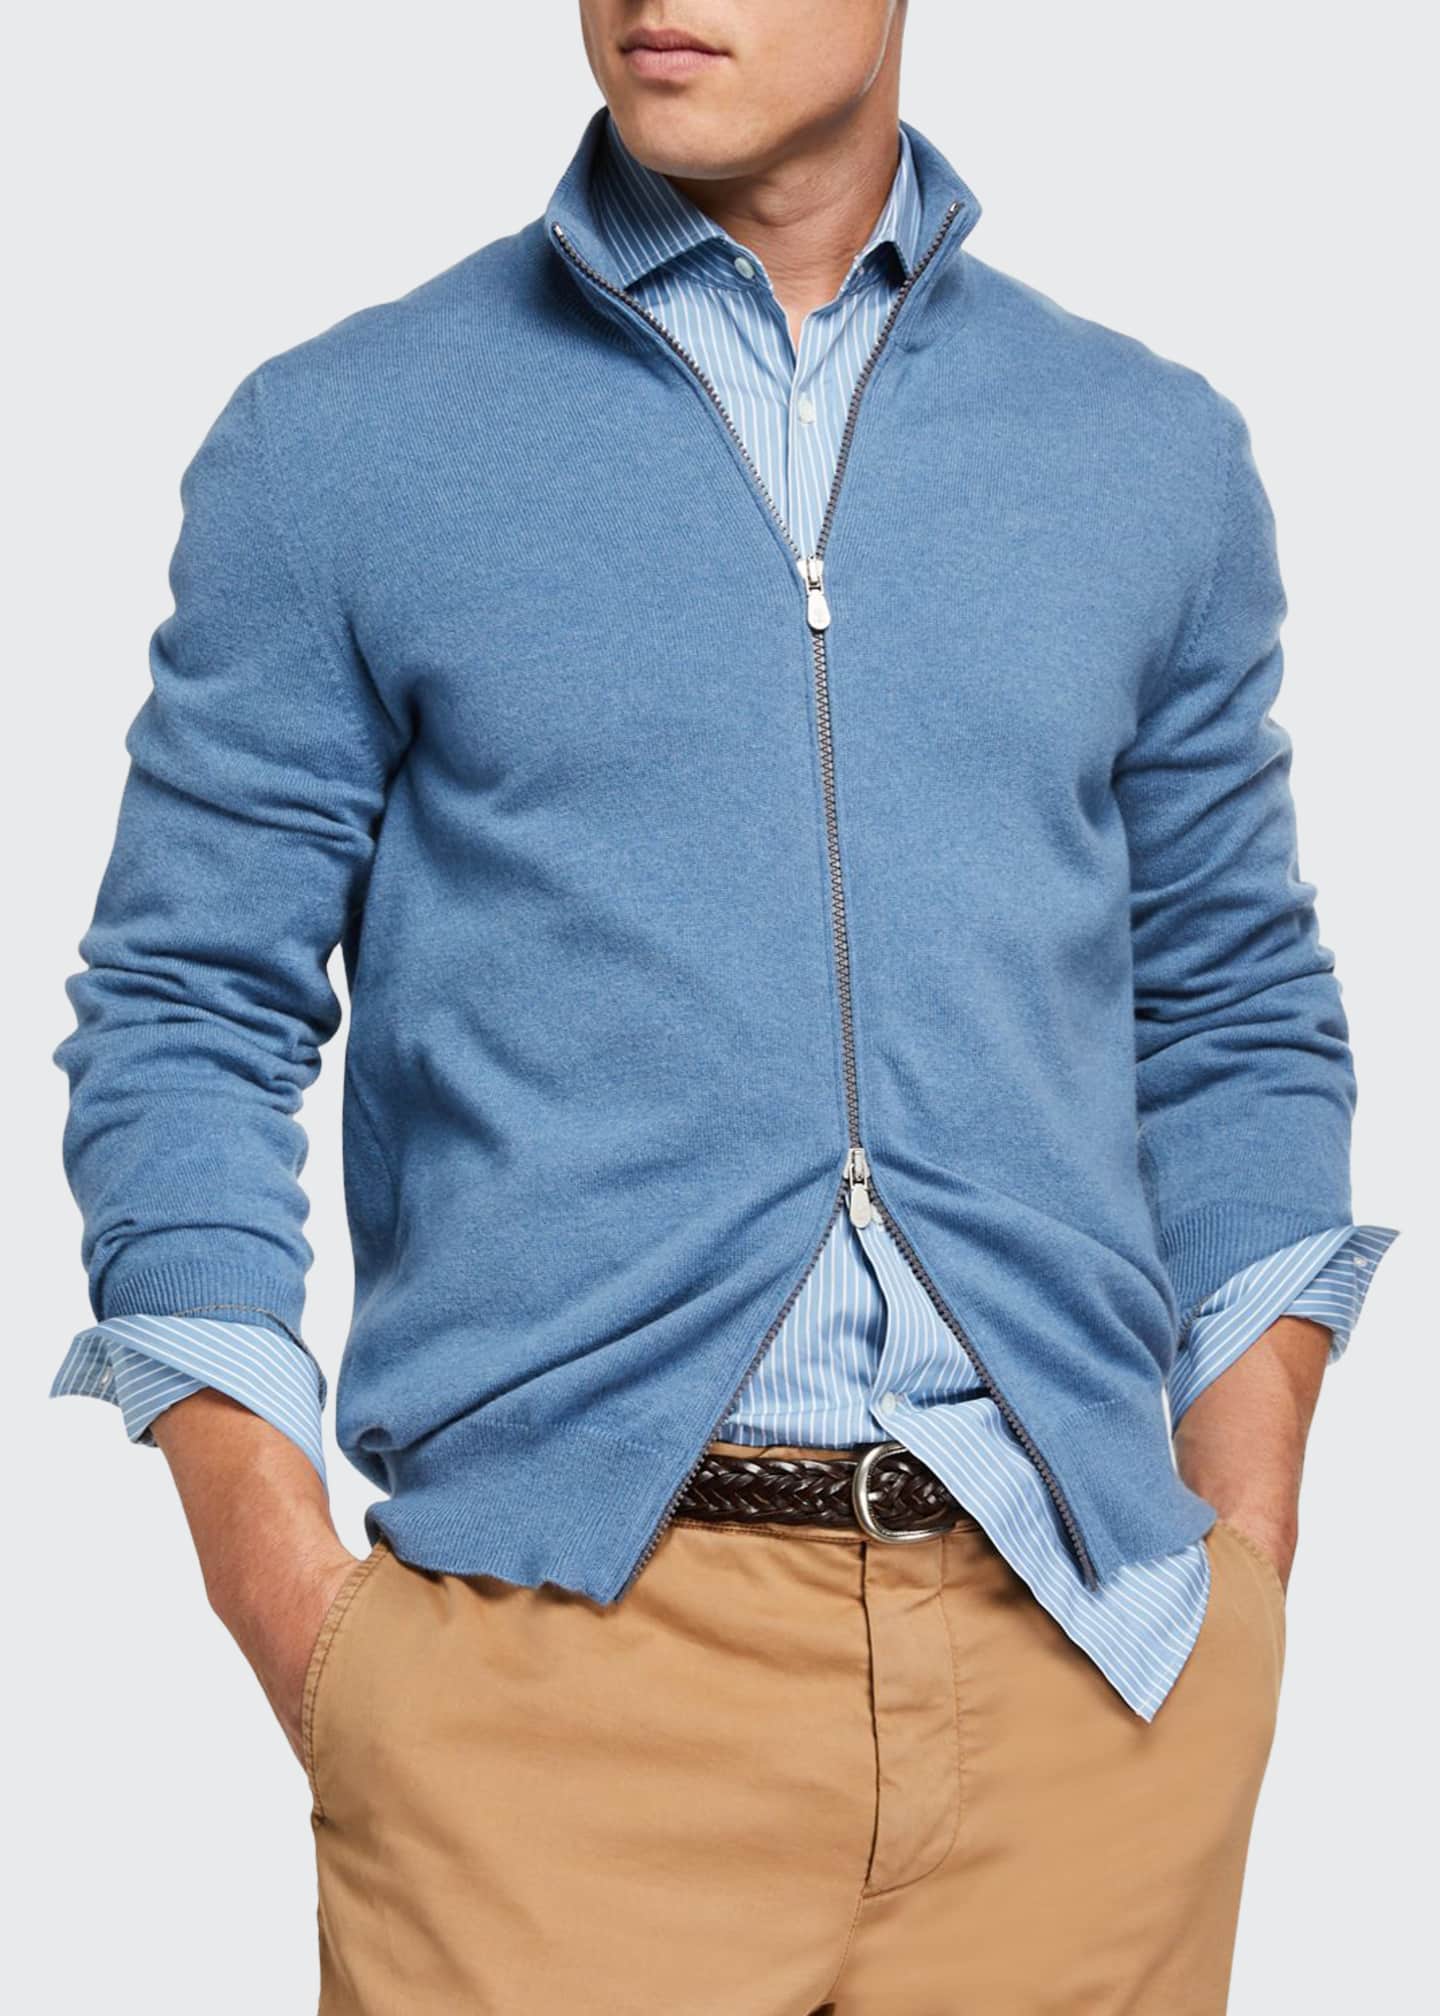 men's sweater with zipper front